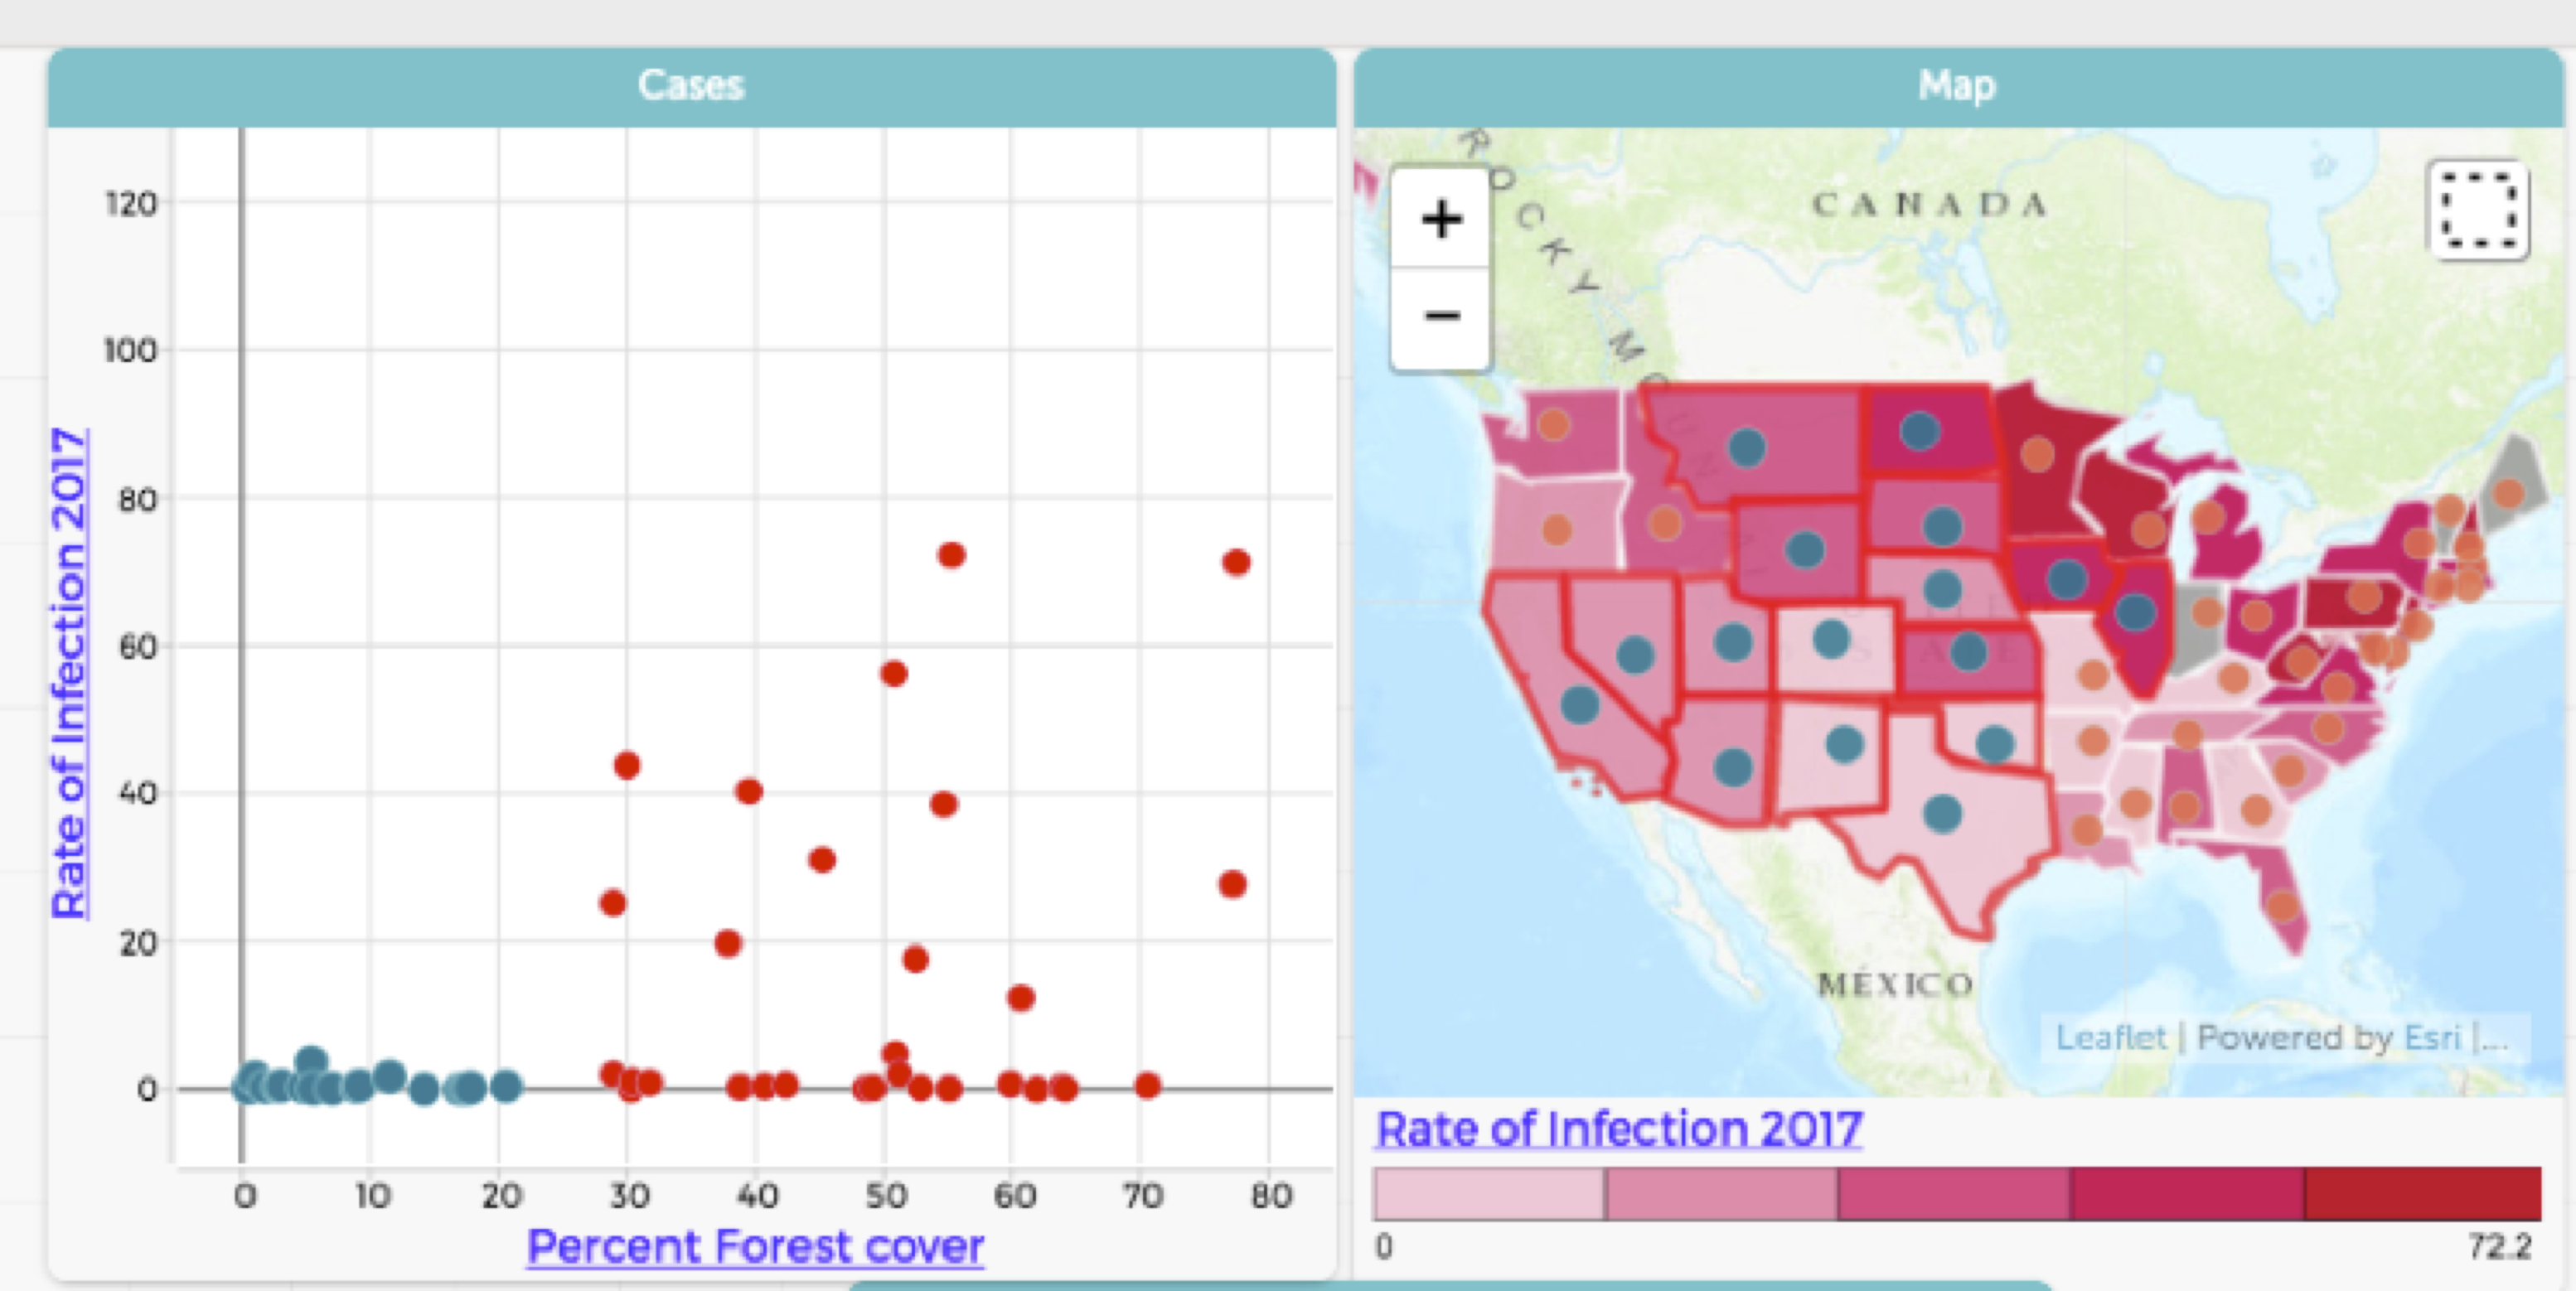 Comparing rates of Lyme infection and percentage forest cover